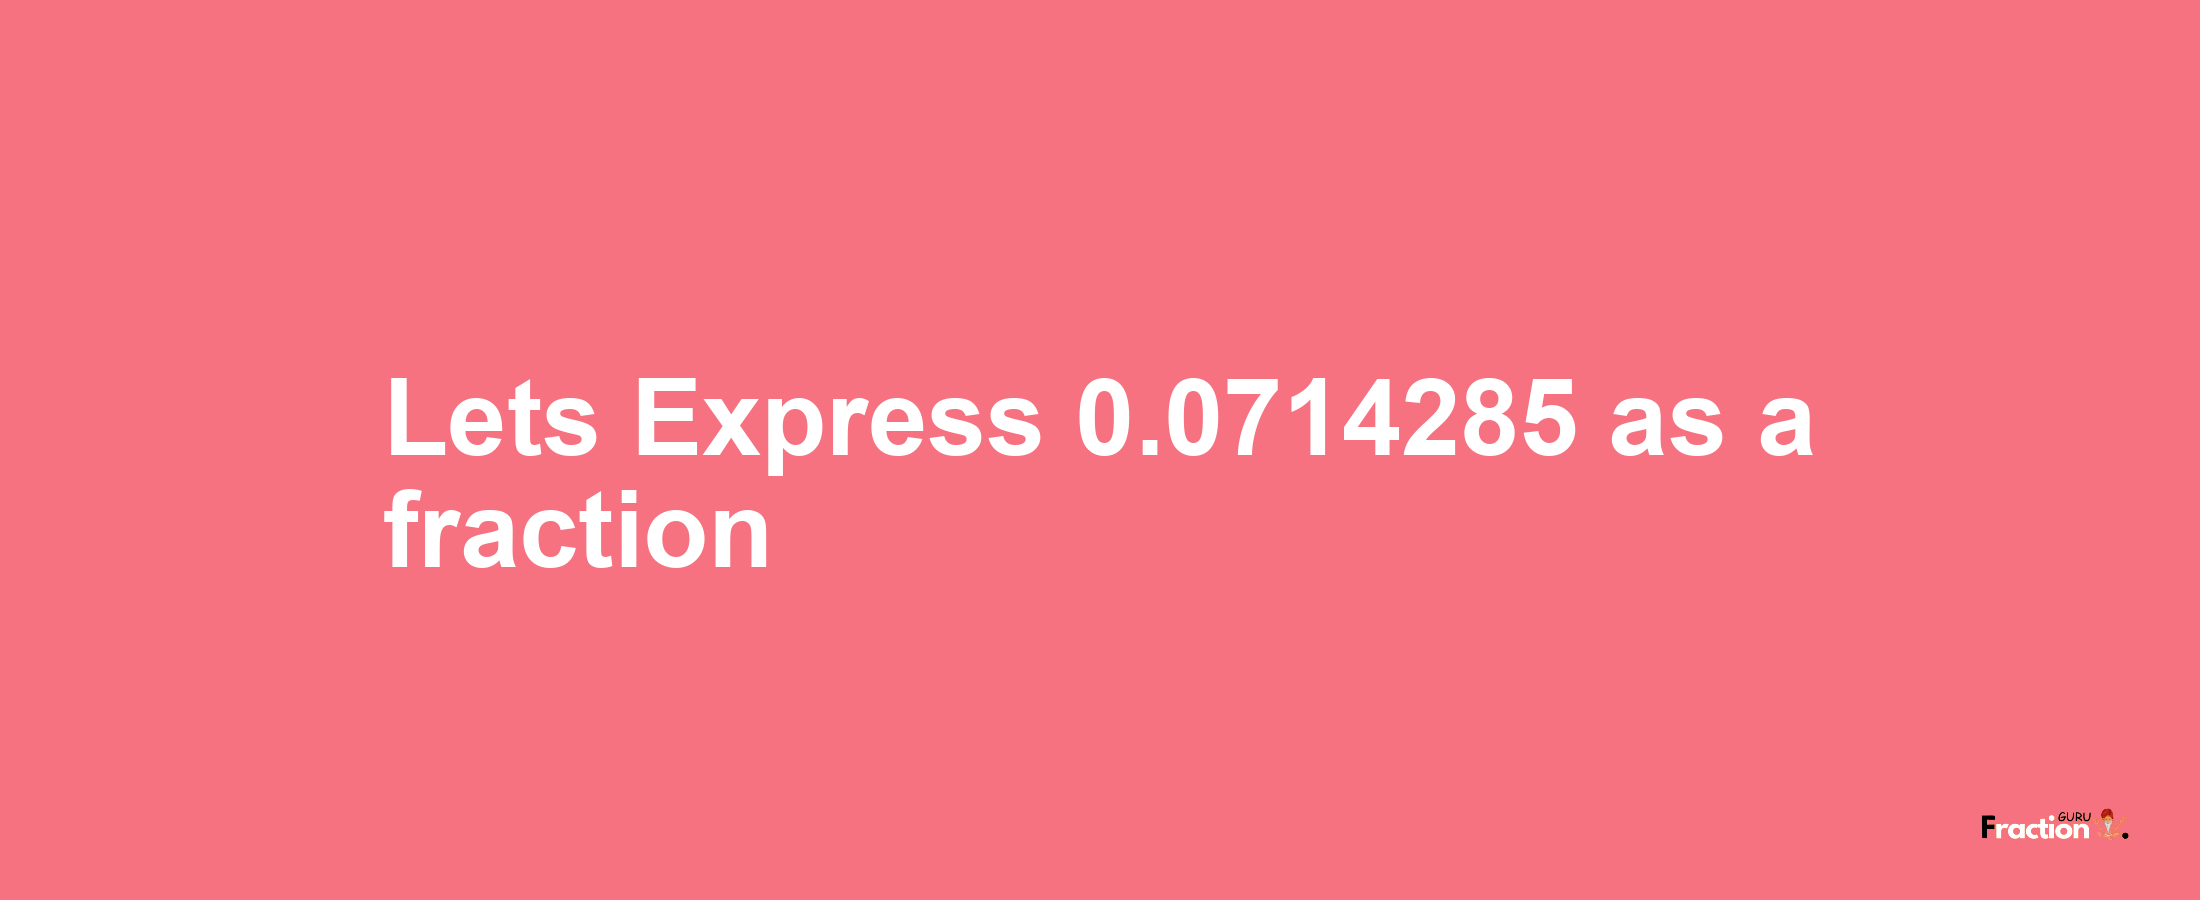 Lets Express 0.0714285 as afraction